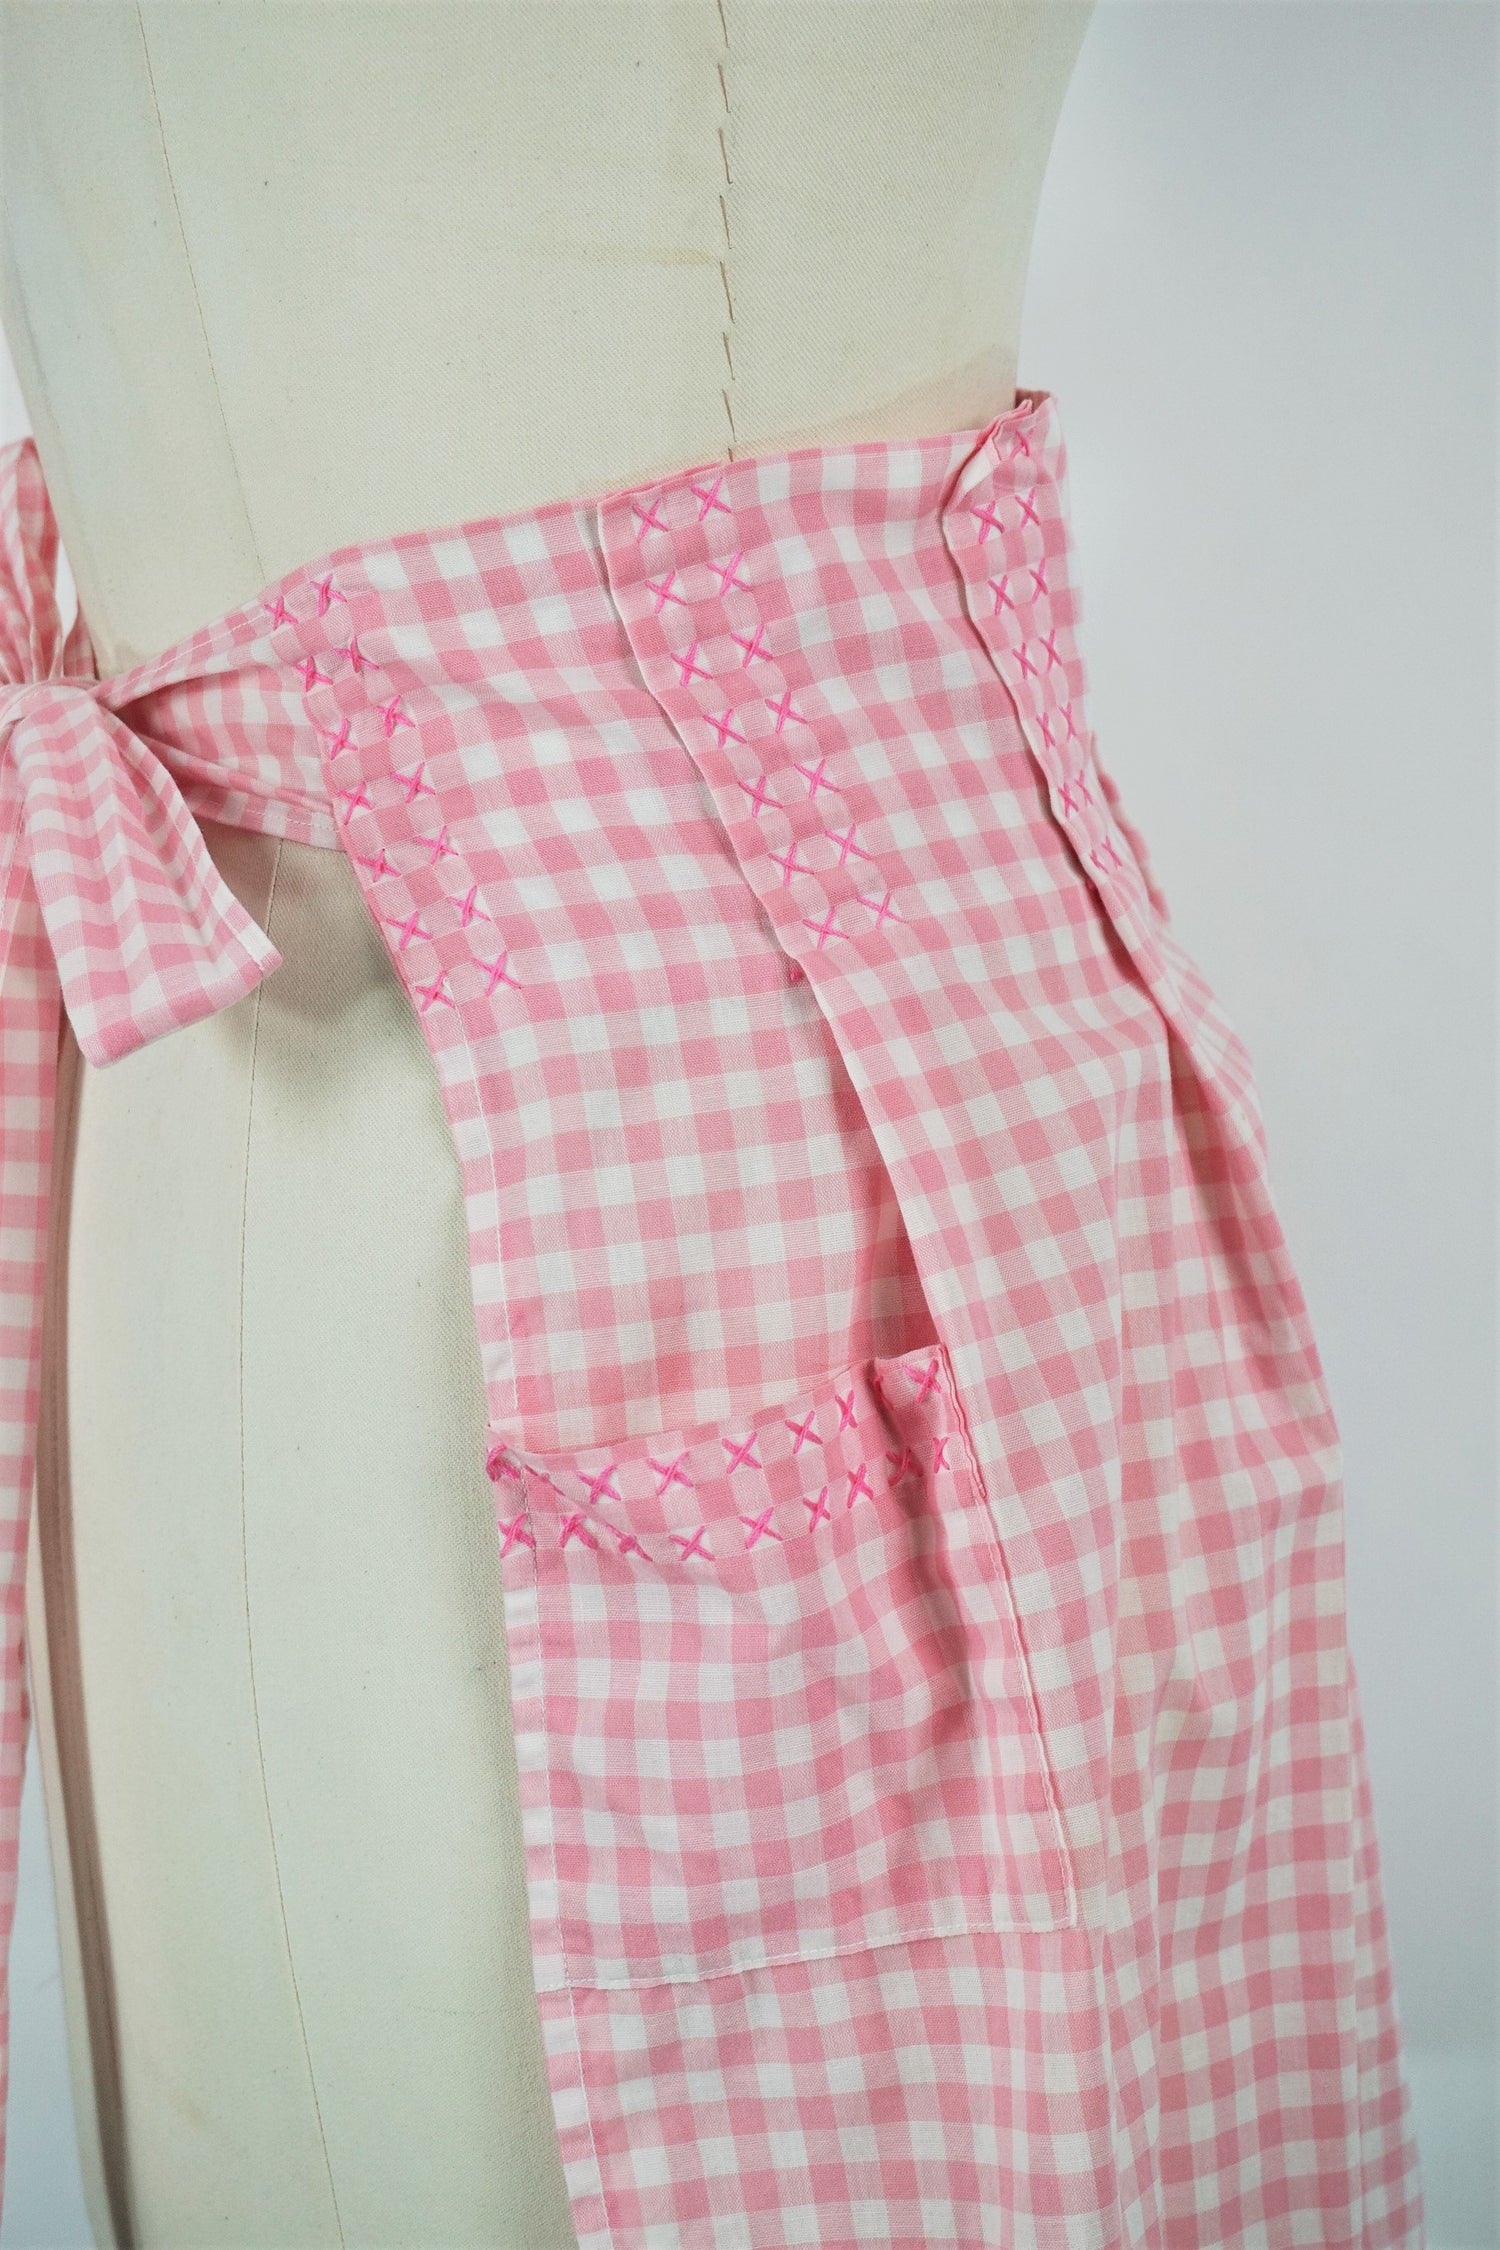 Vintage 1960s Pink And White Gingham Apron With Pocket 